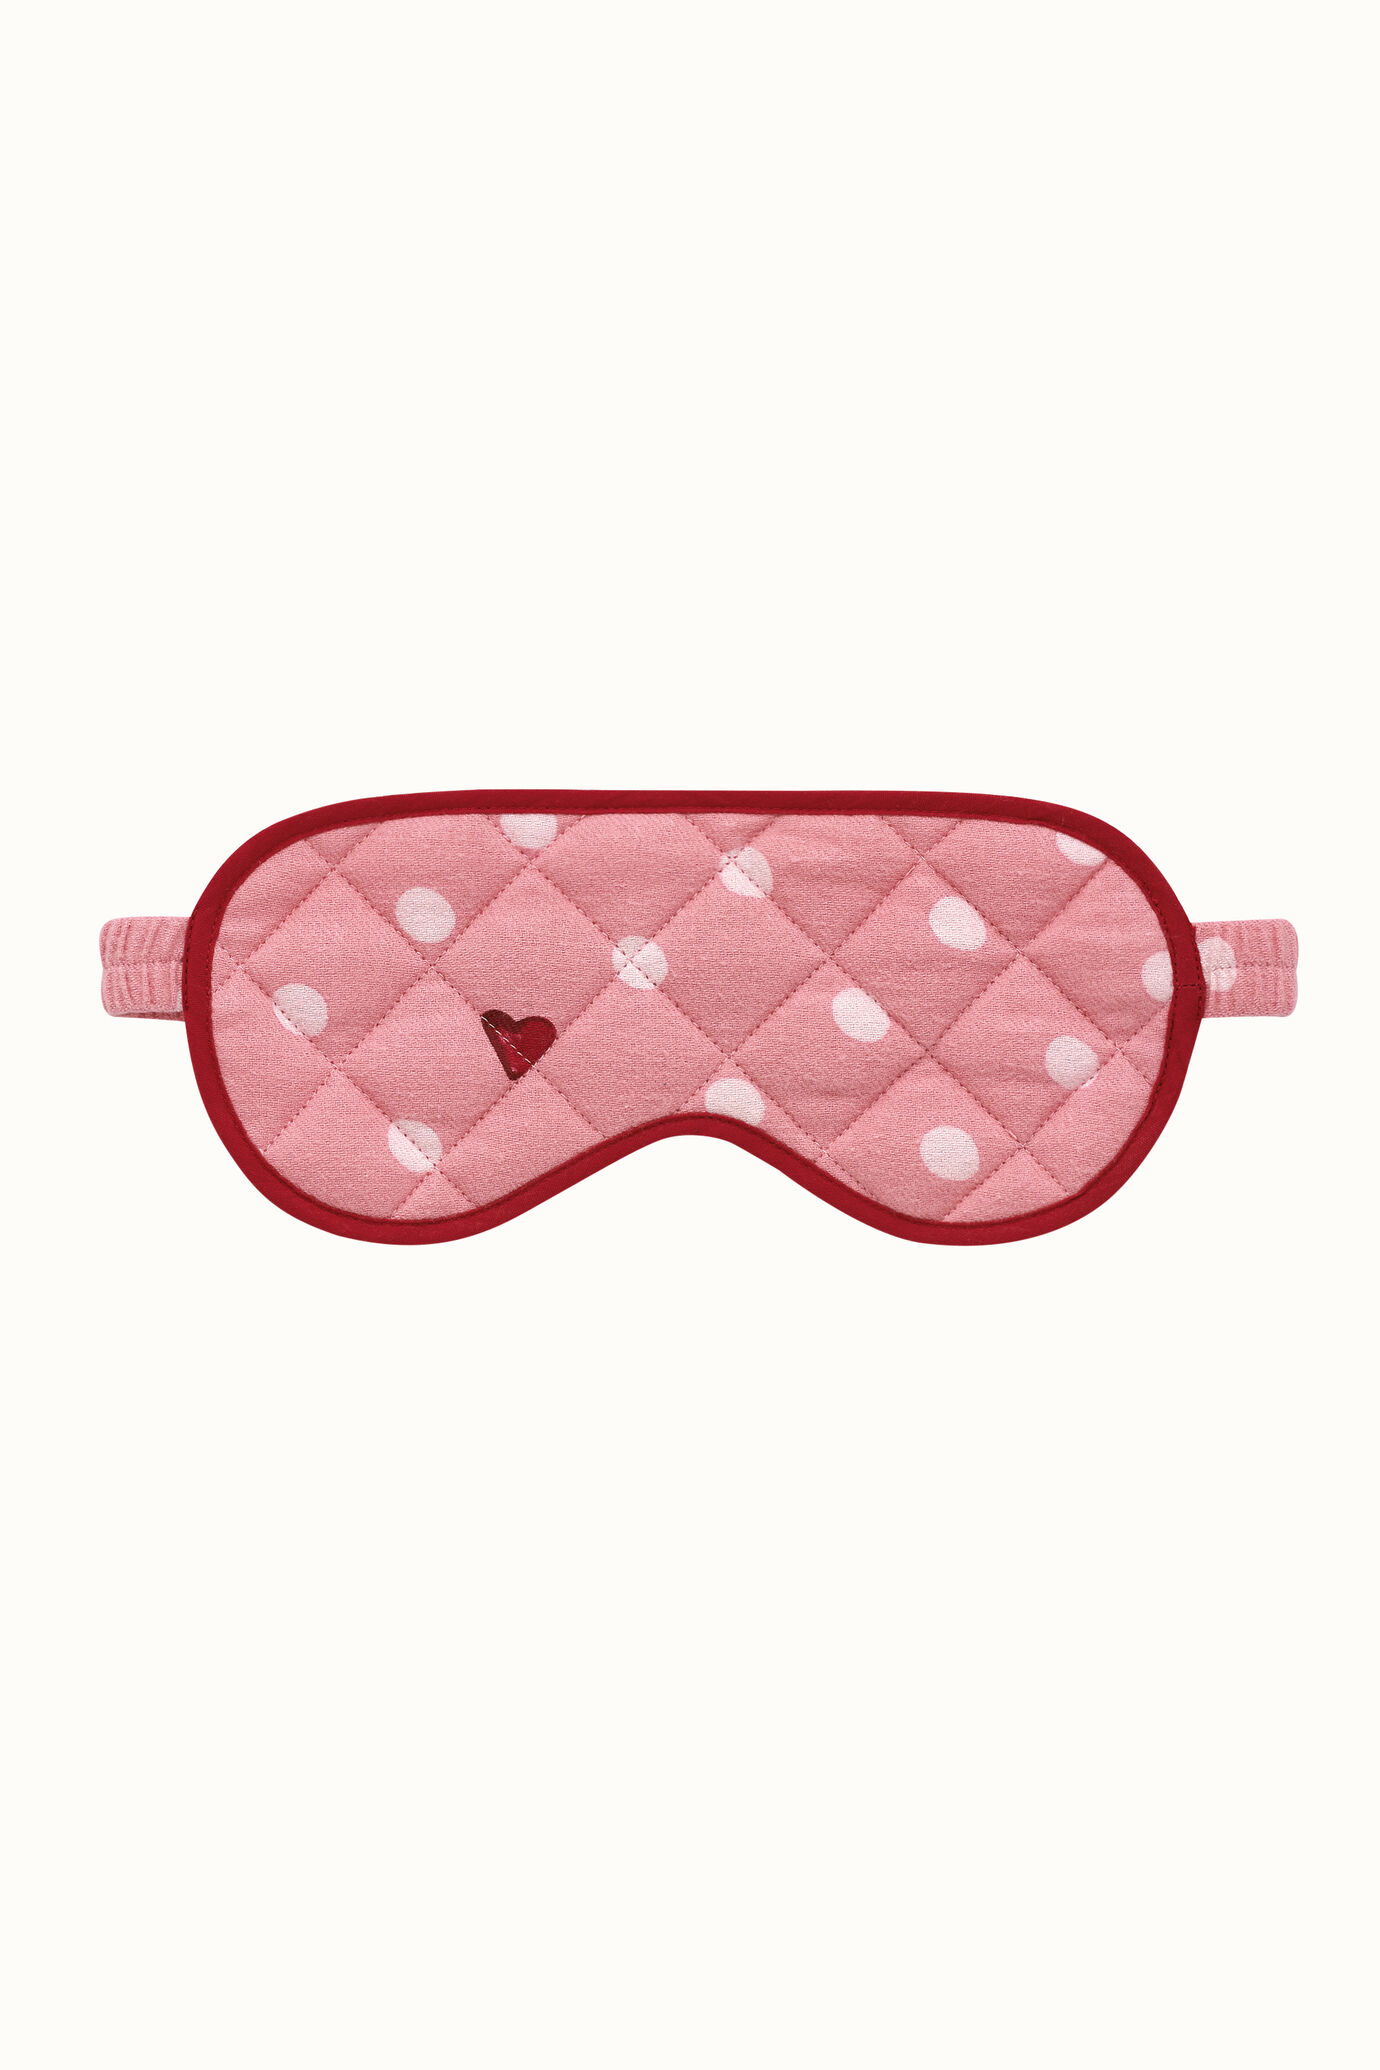 Cath Kidston Heart Spot Eye Mask With Pouch